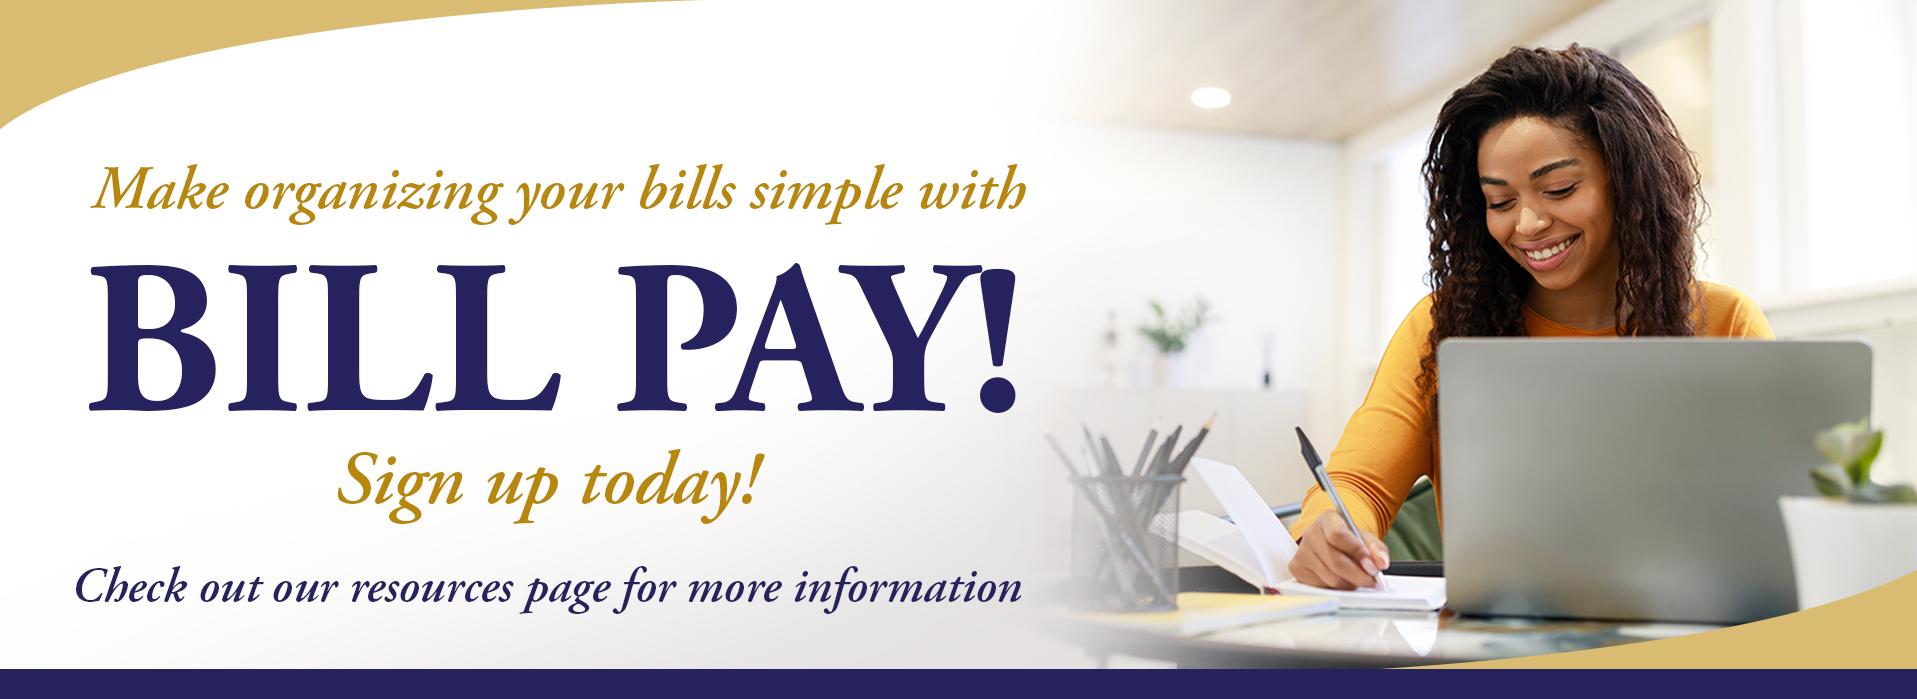 Make organizing your bills simple with Bill Pay!  Sign up today!  Check out our resources page for more information.  Image of a woman at a desk with a laptop.